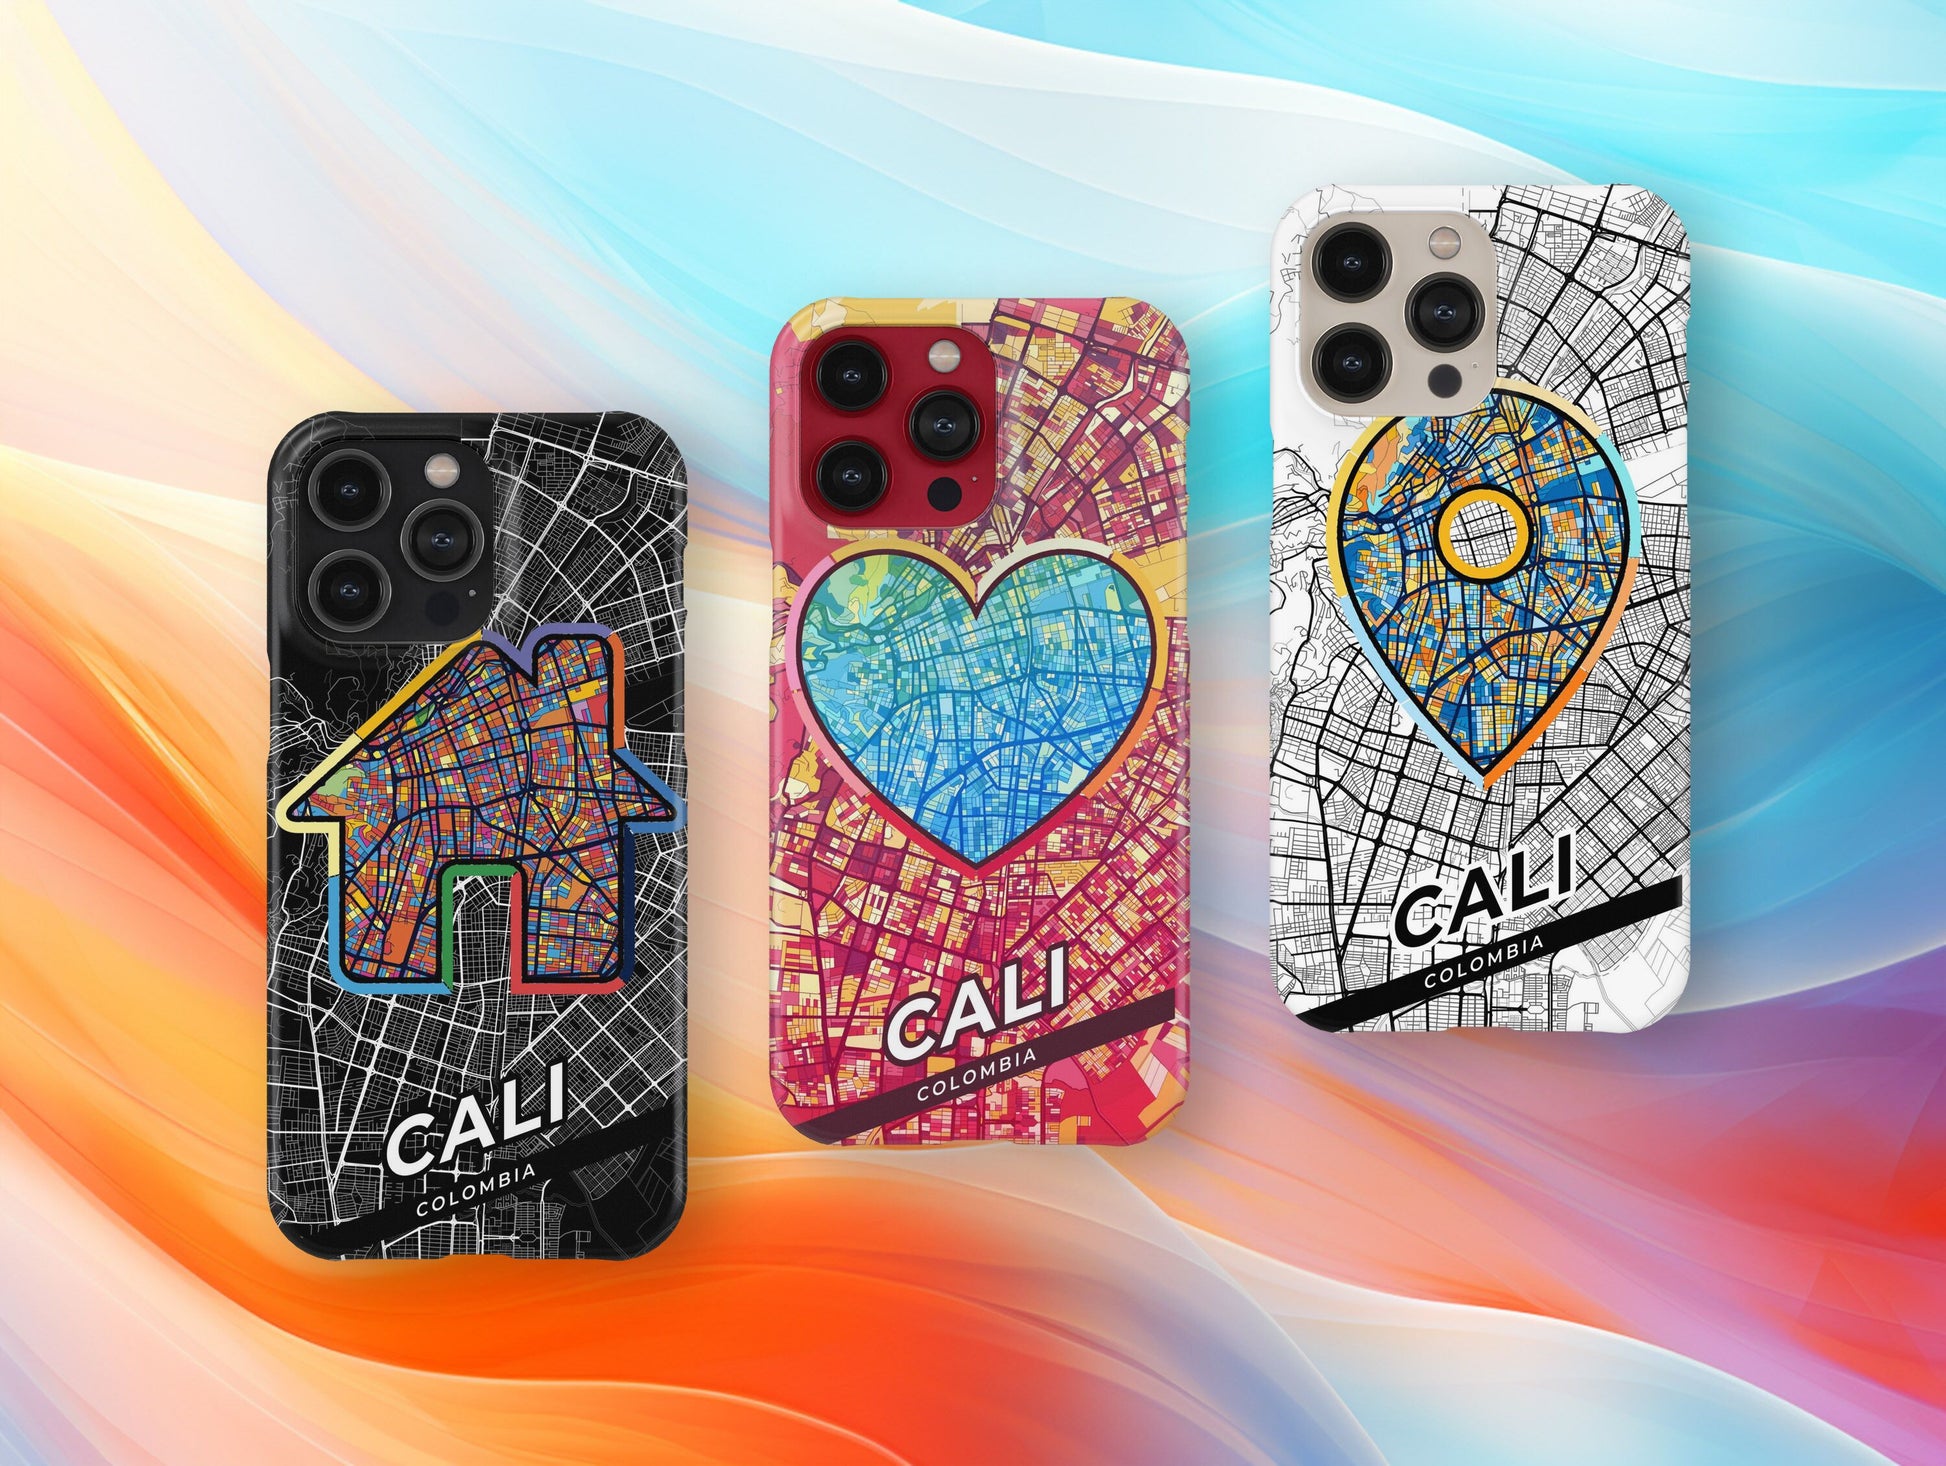 Cali Colombia slim phone case with colorful icon. Birthday, wedding or housewarming gift. Couple match cases.